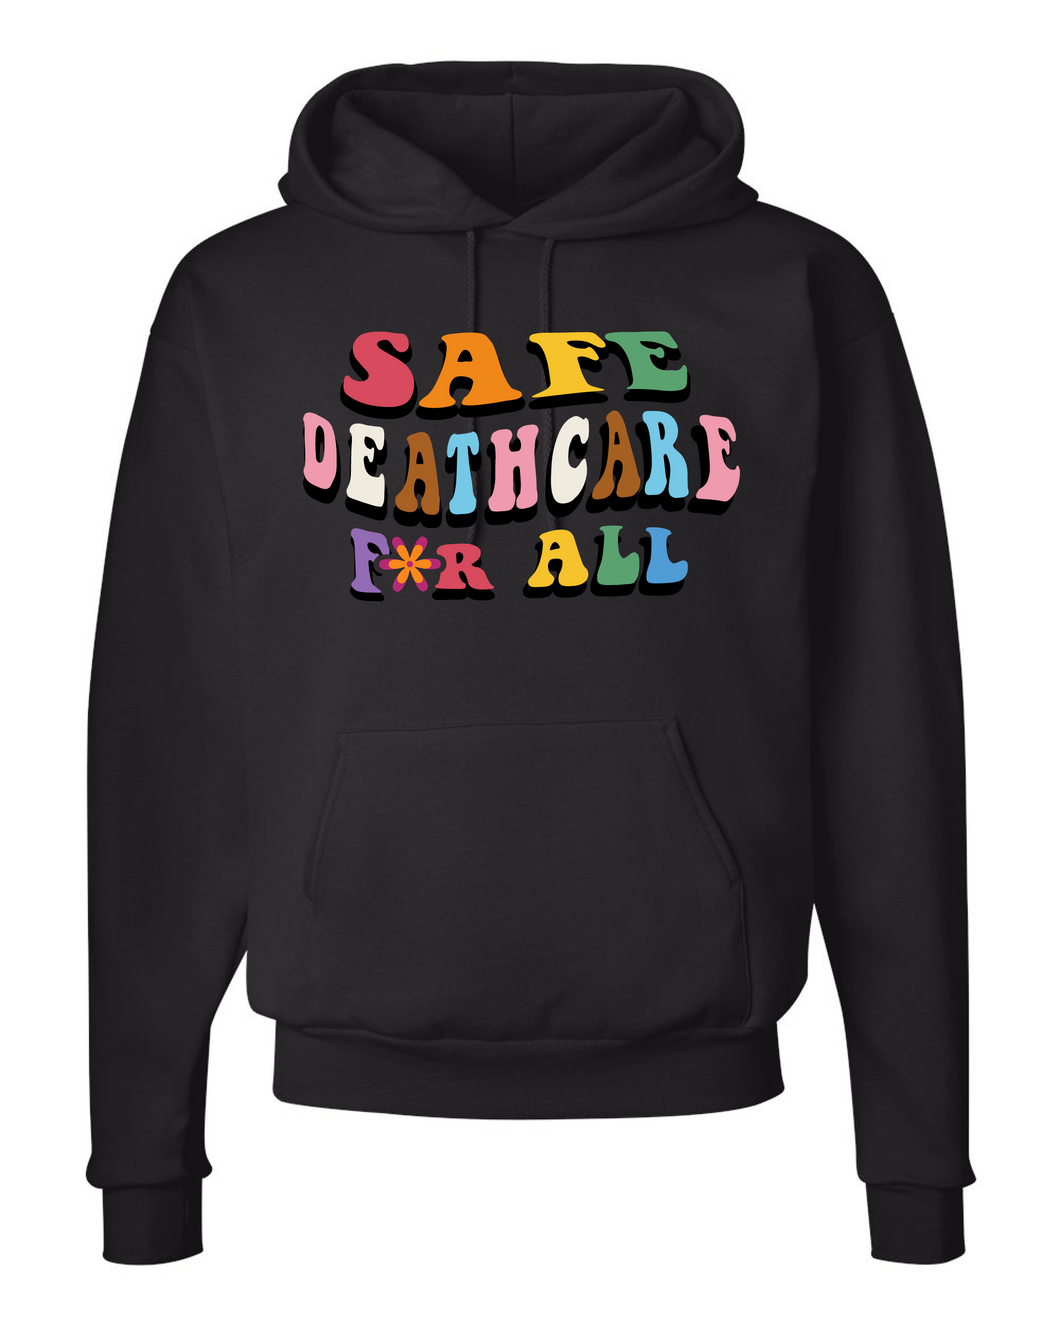 Safe Deathcare for All Hooded Sweatshirt